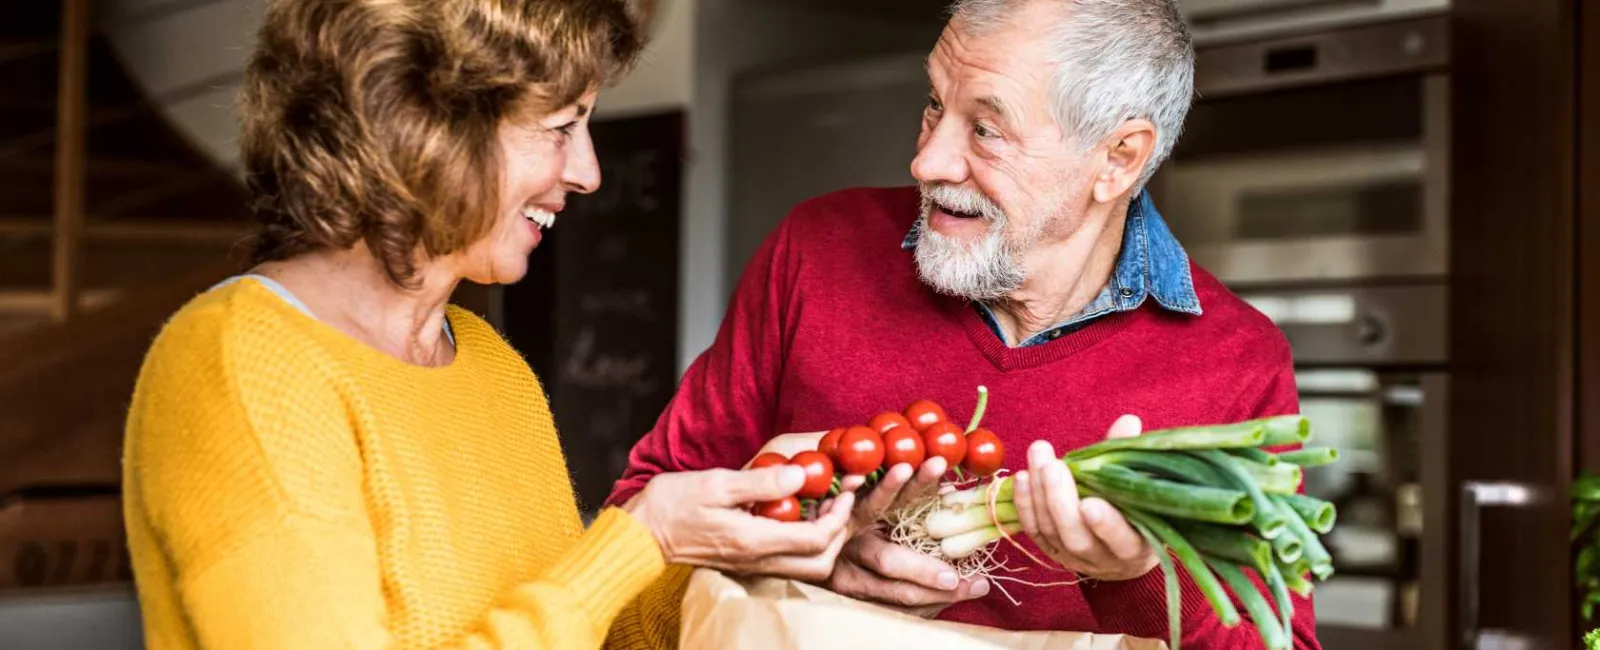 How to Prepare for In-Home Senior Care